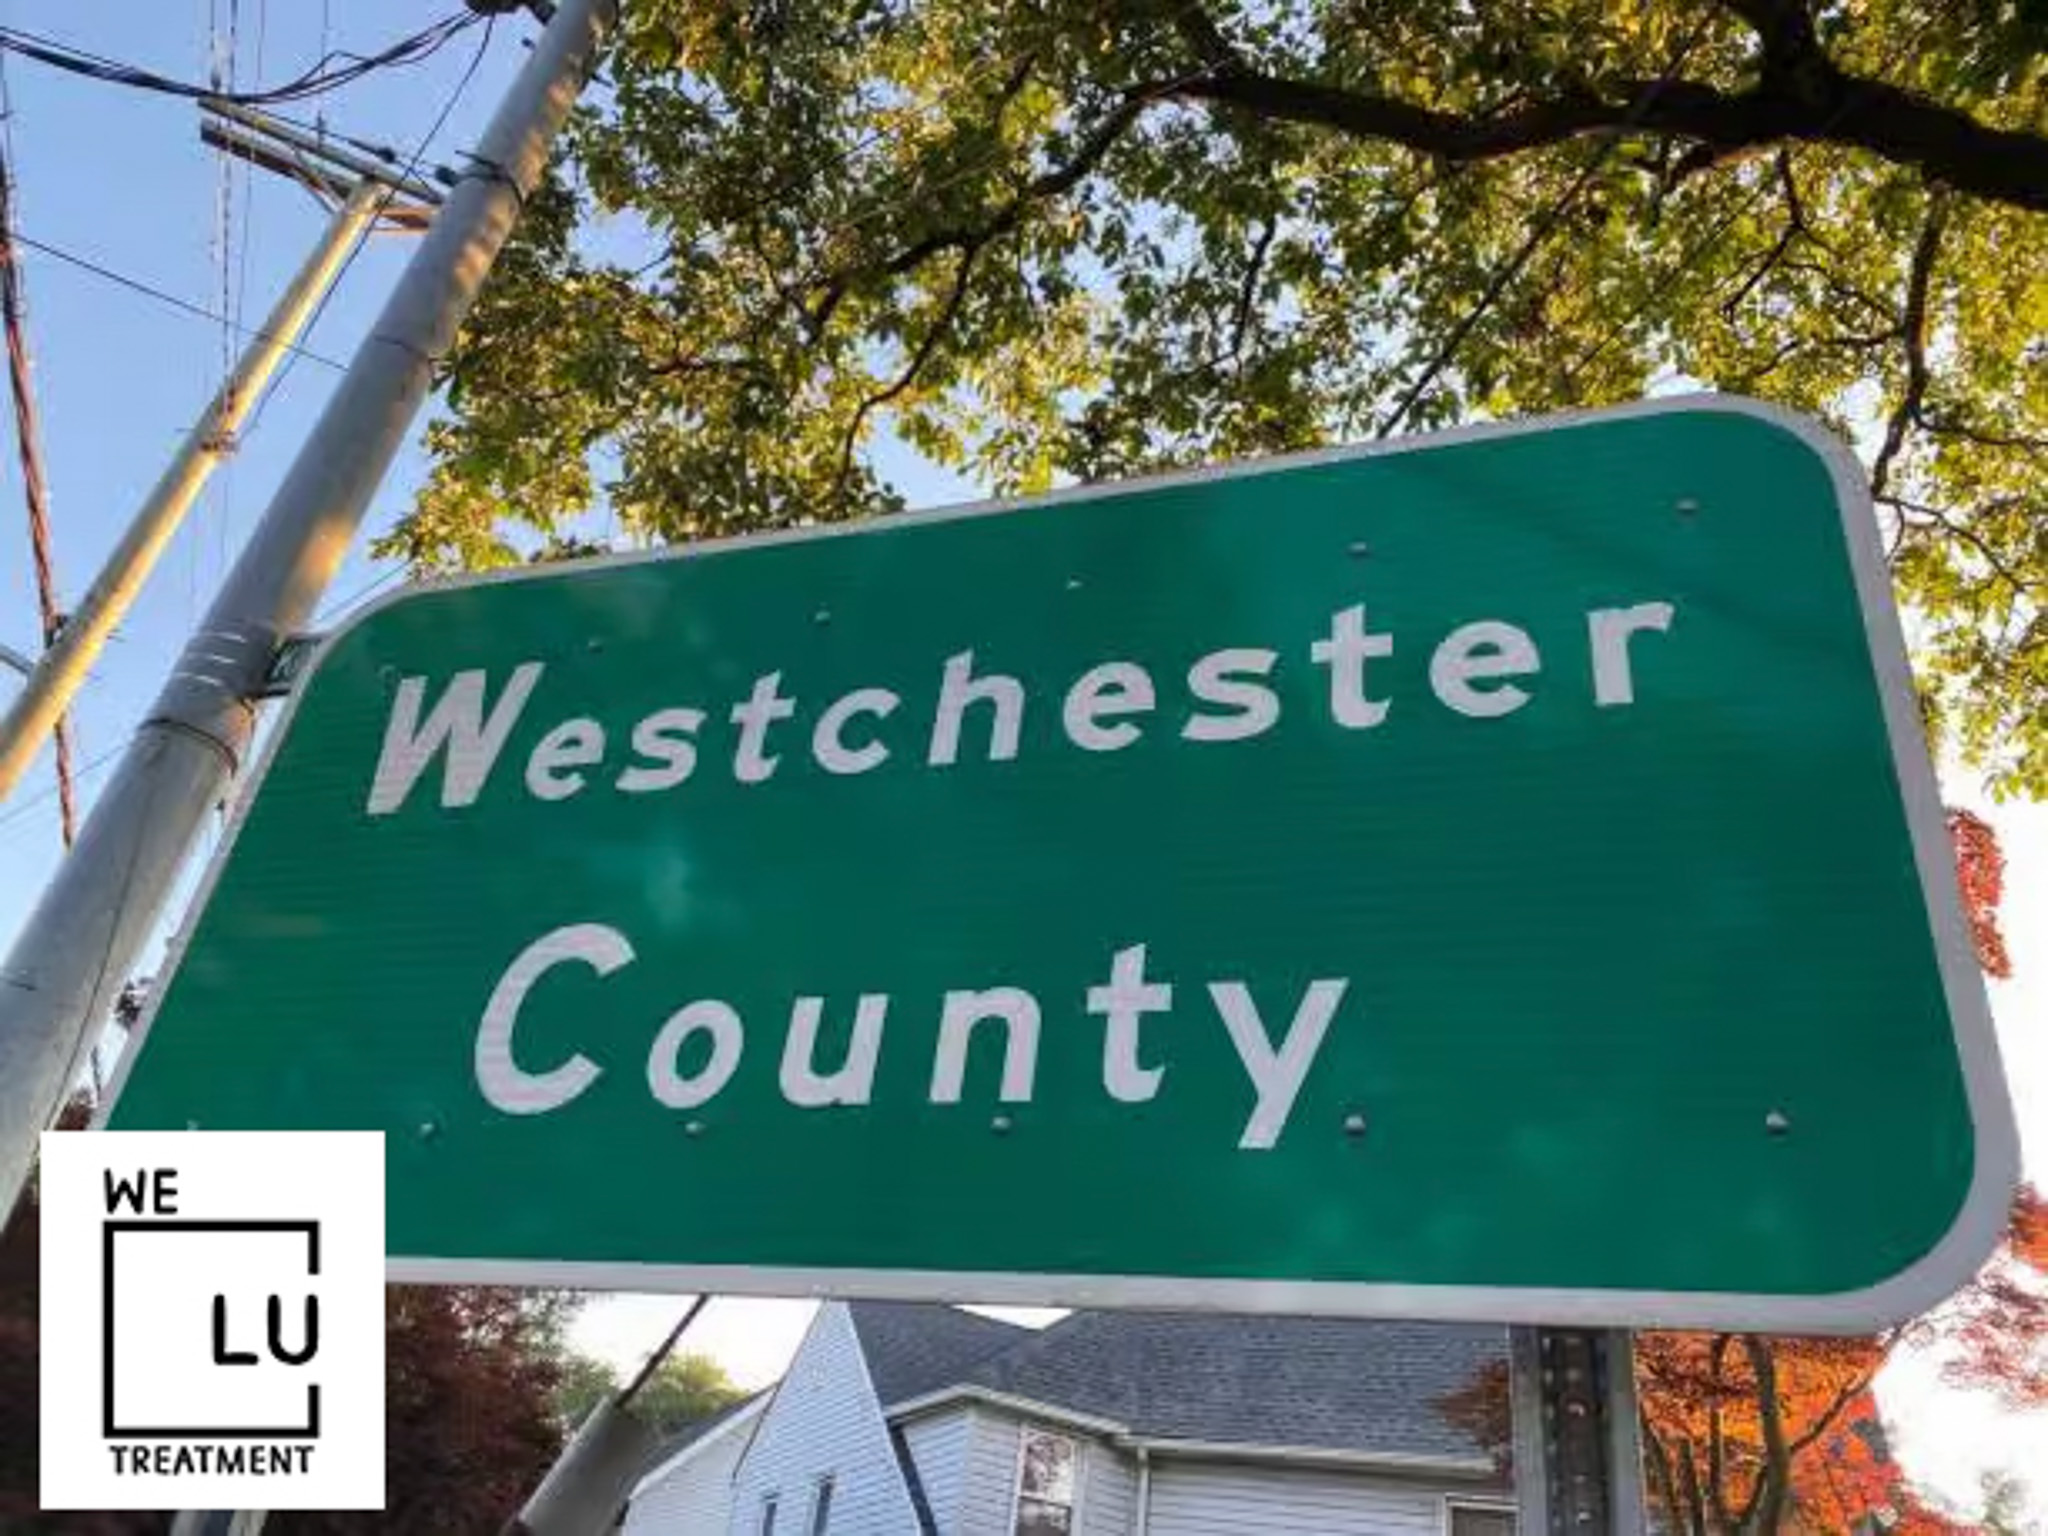 Westchester NY We Level Up treatment center for drug and alcohol rehab detox and mental health services - Image 1